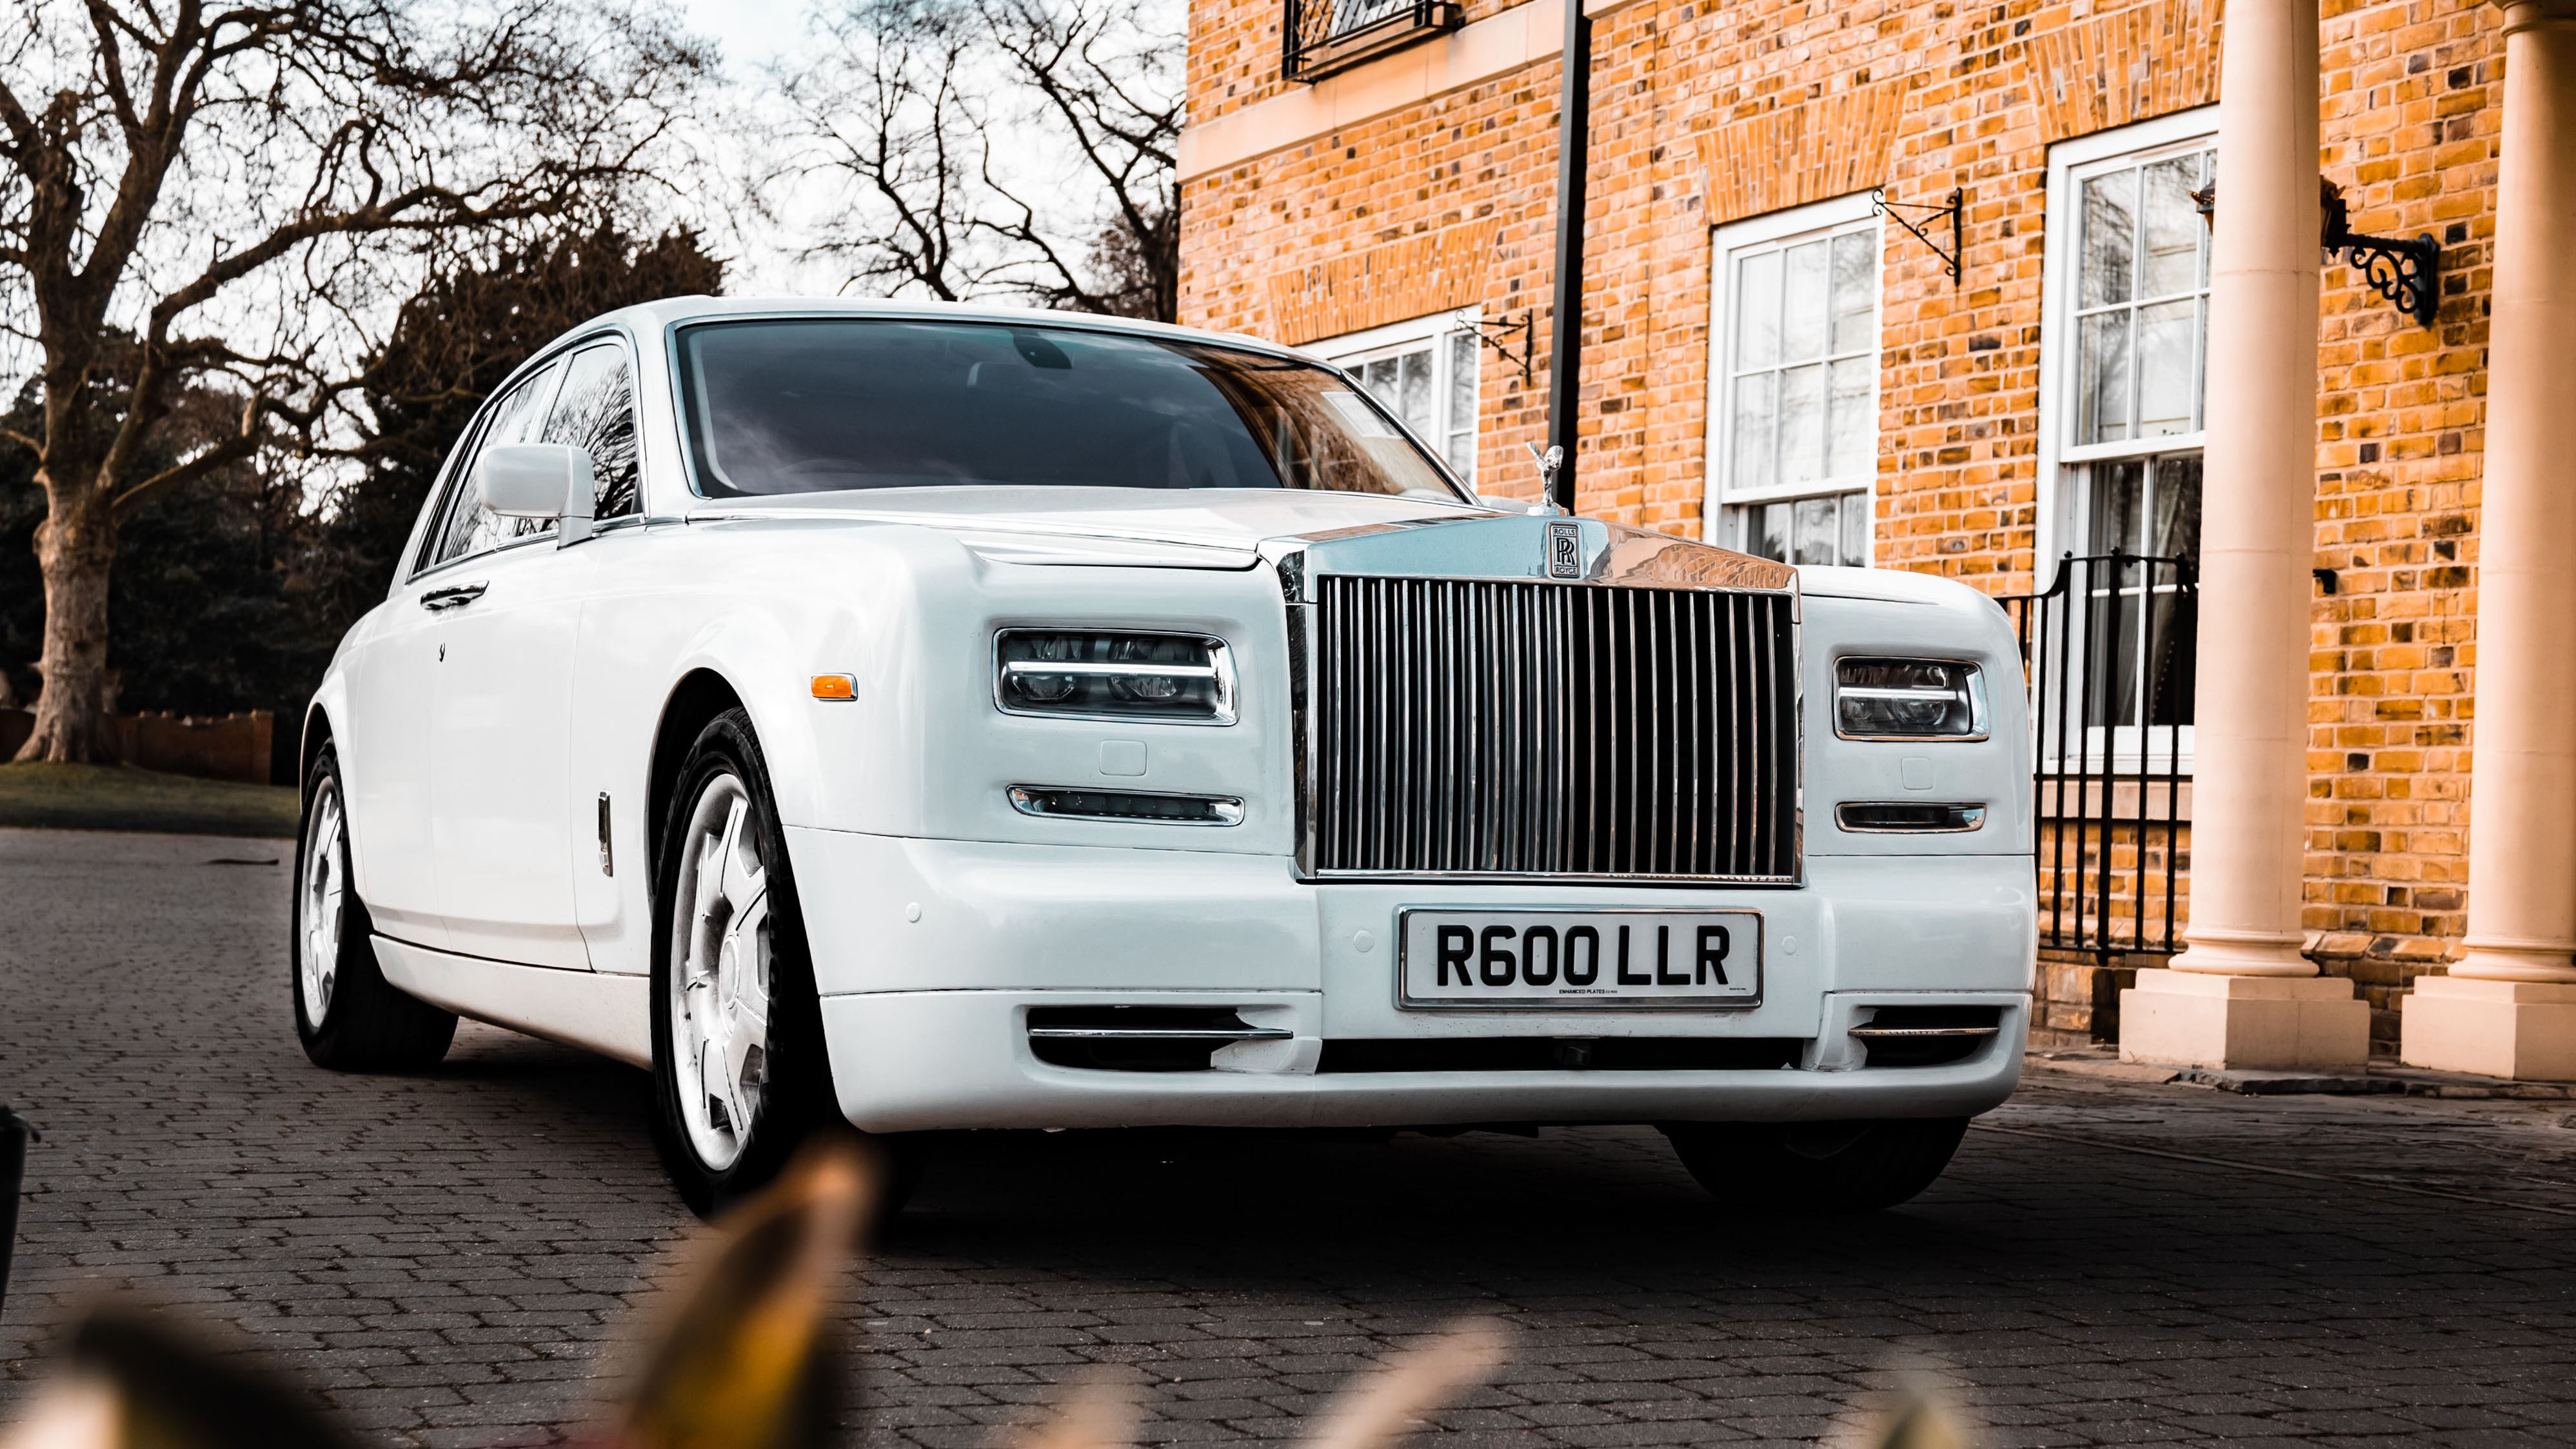 Modern white Rolls-Royce Phantom with its large chrome alloy wheels and iconic chrome front grill in attendance at a popular wedding venue in Clacton-On-Sea in Essex.